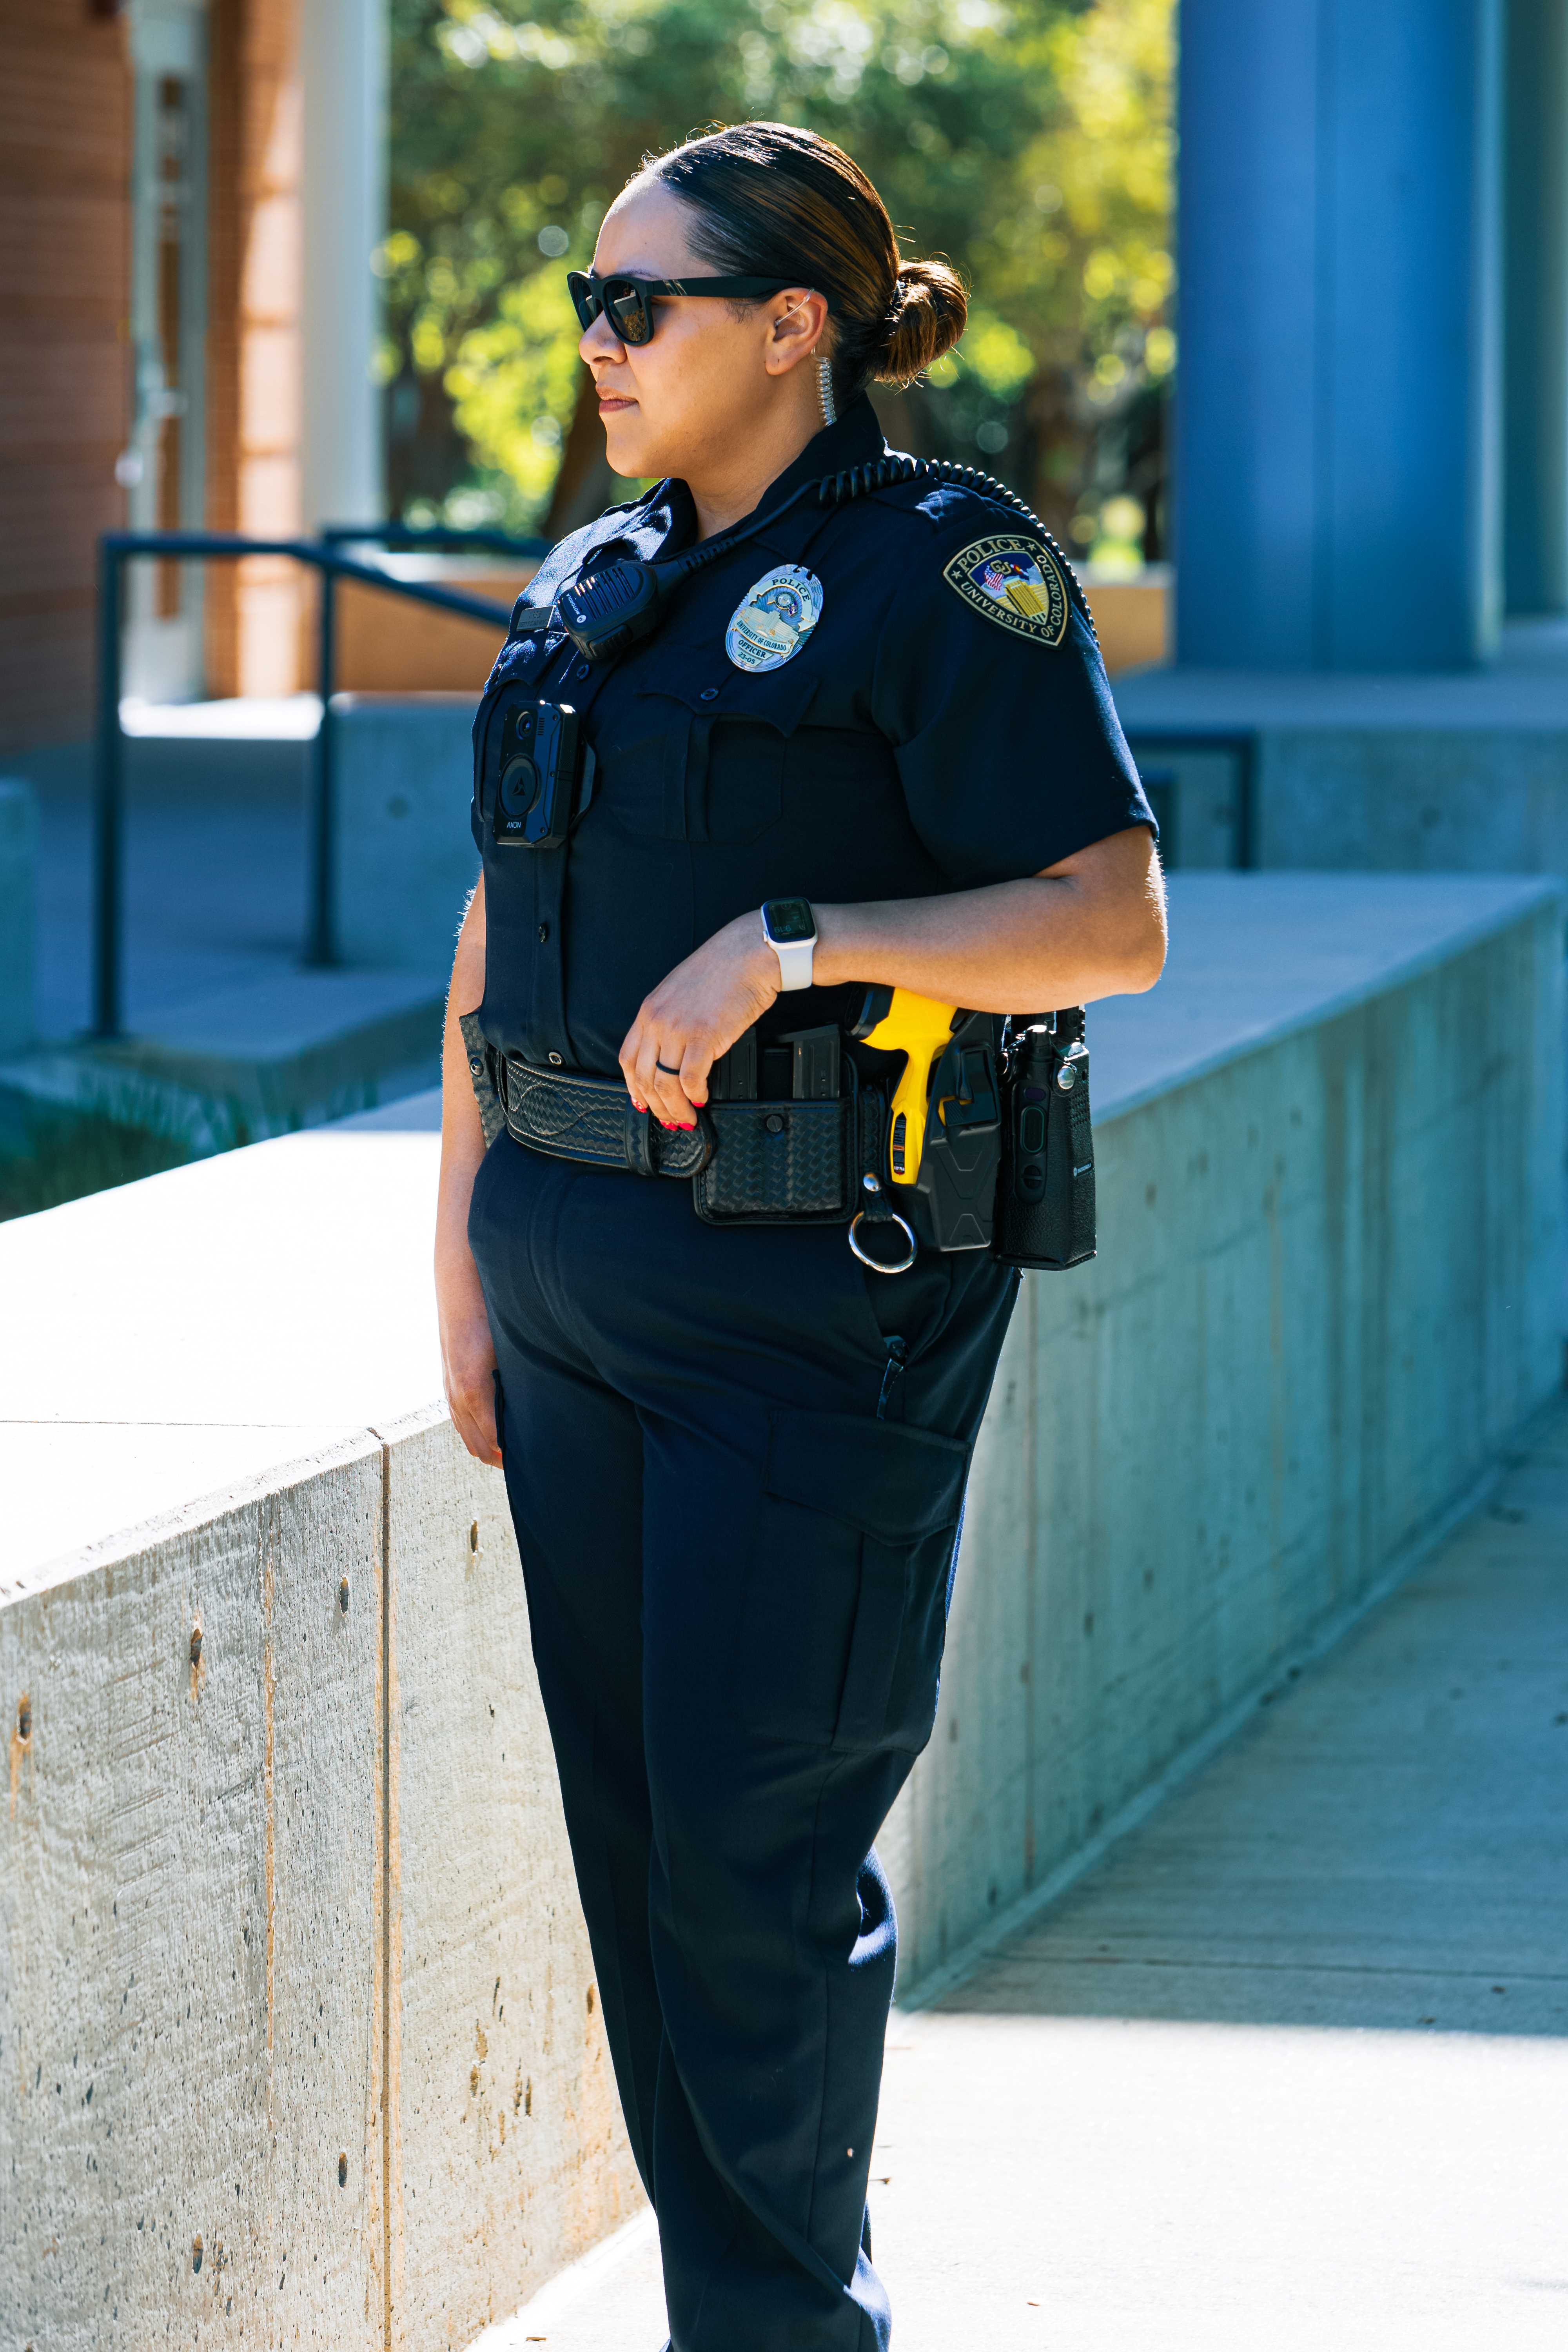 Female Police Officer Outdoors